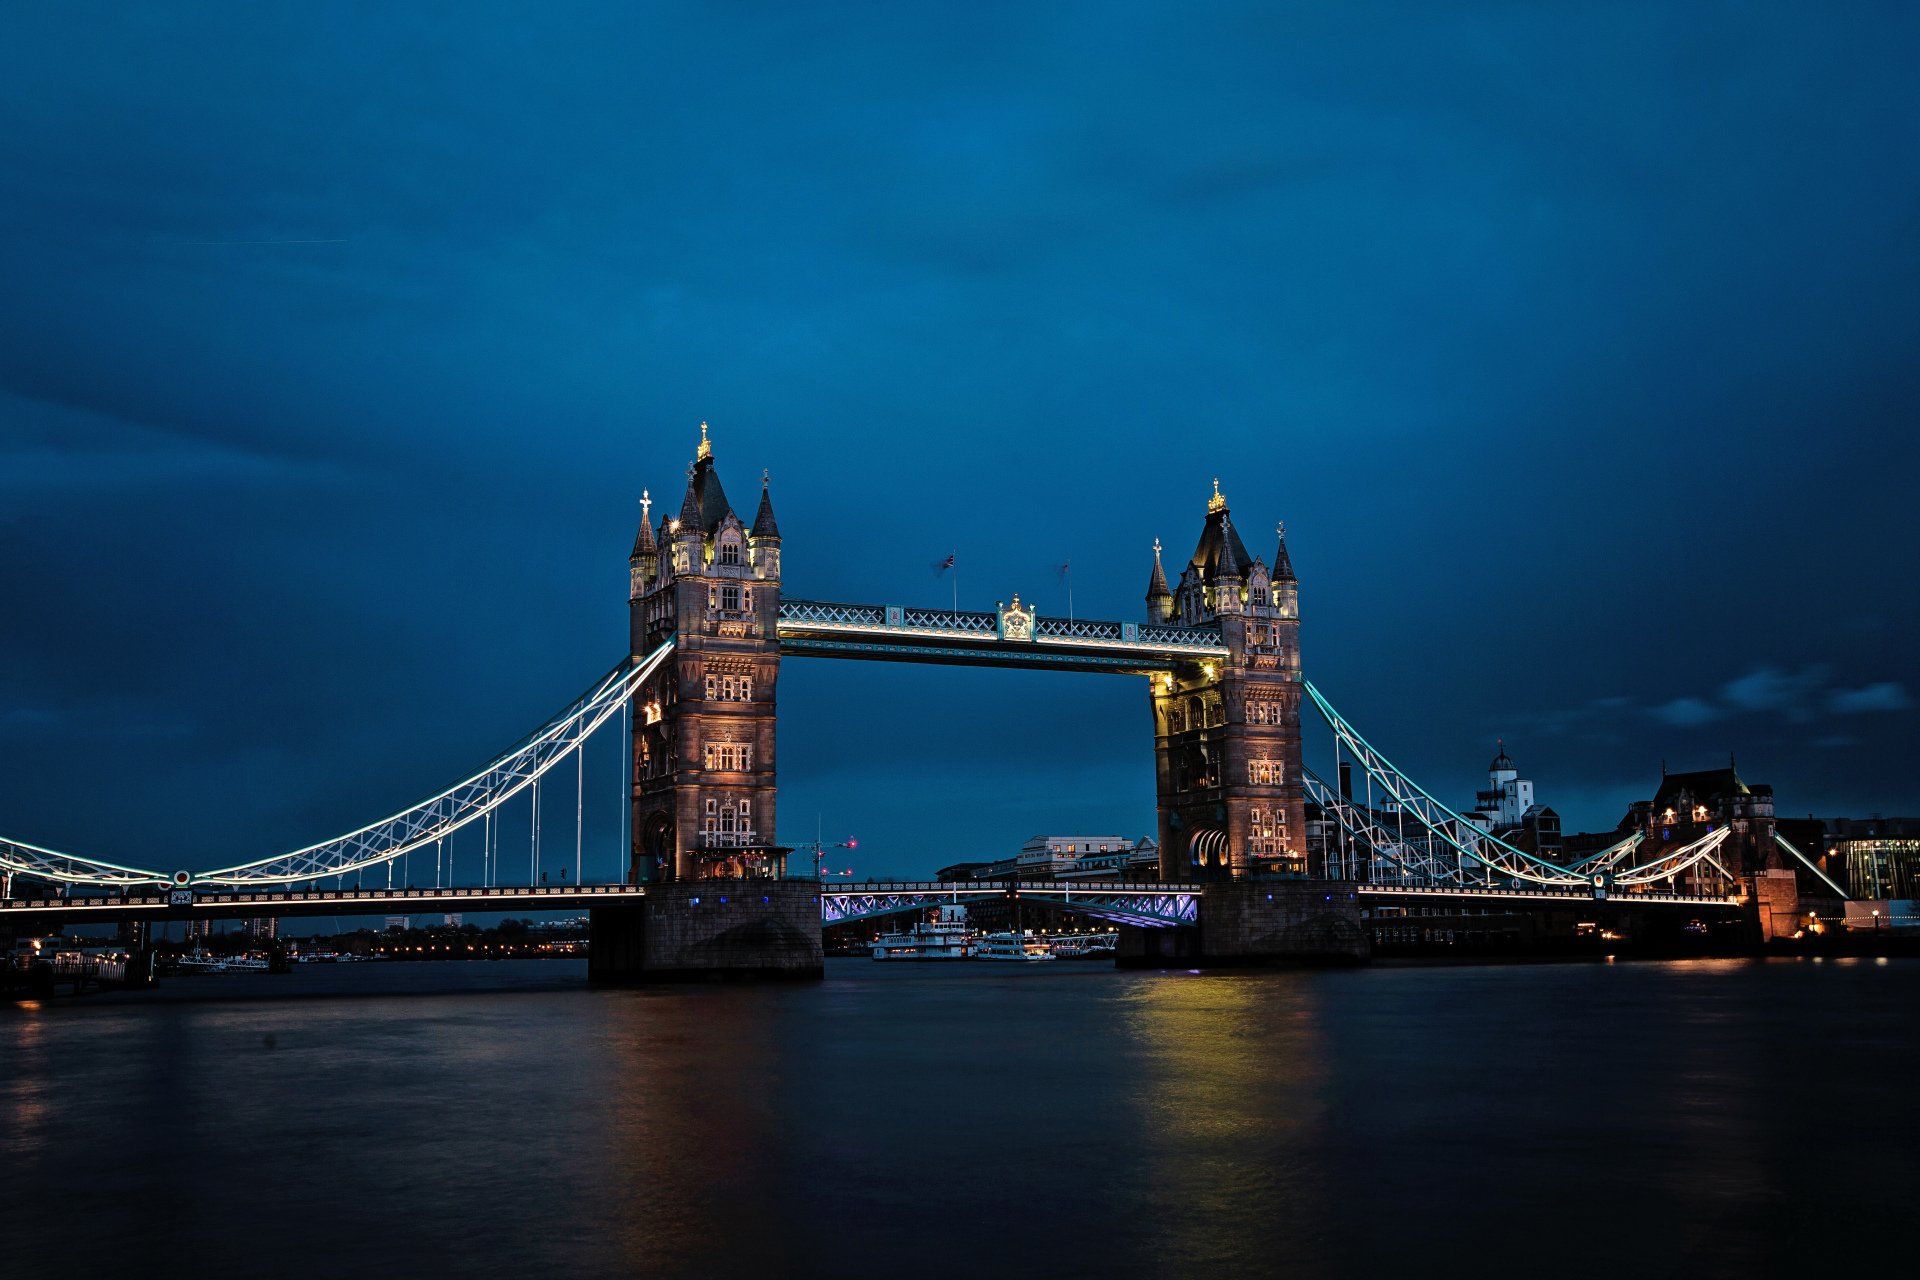 The tower bridge in london is lit up at night.